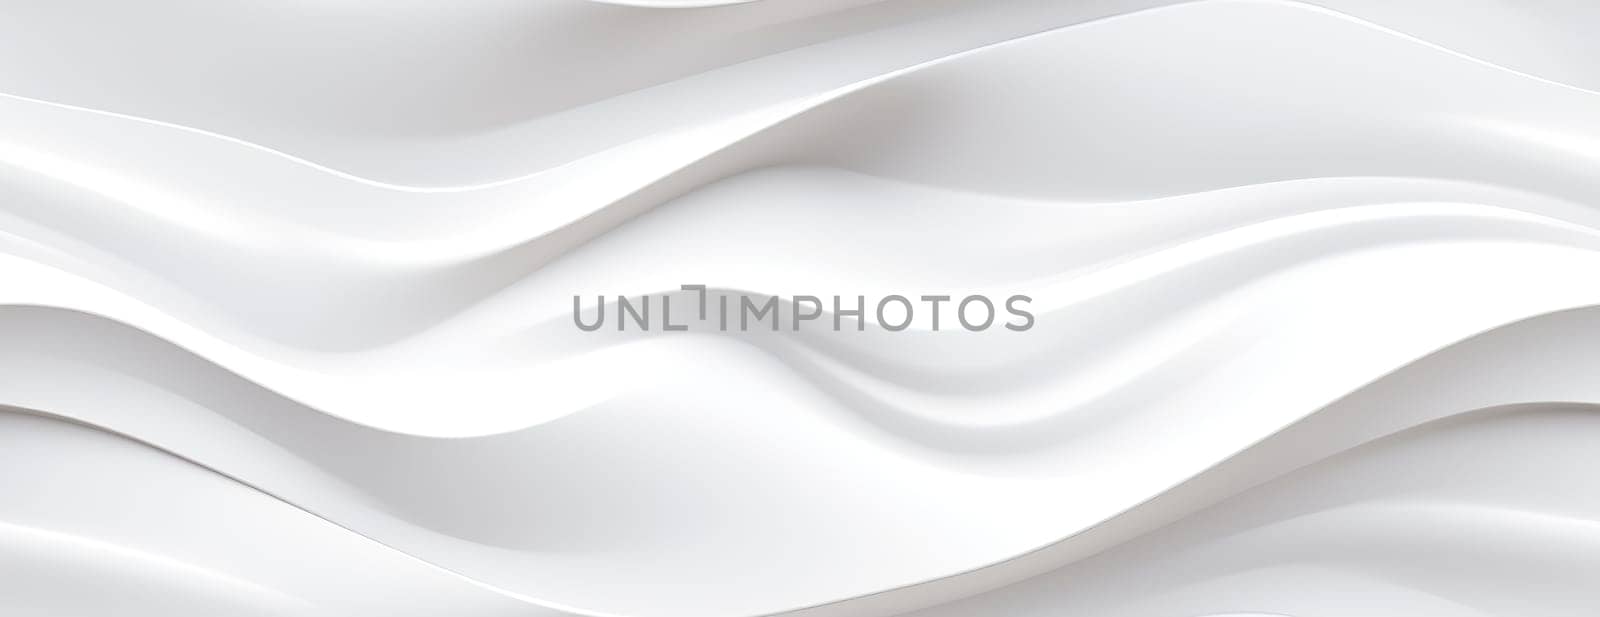 The texture is white geometric waves, seamless. Beautiful background for your design